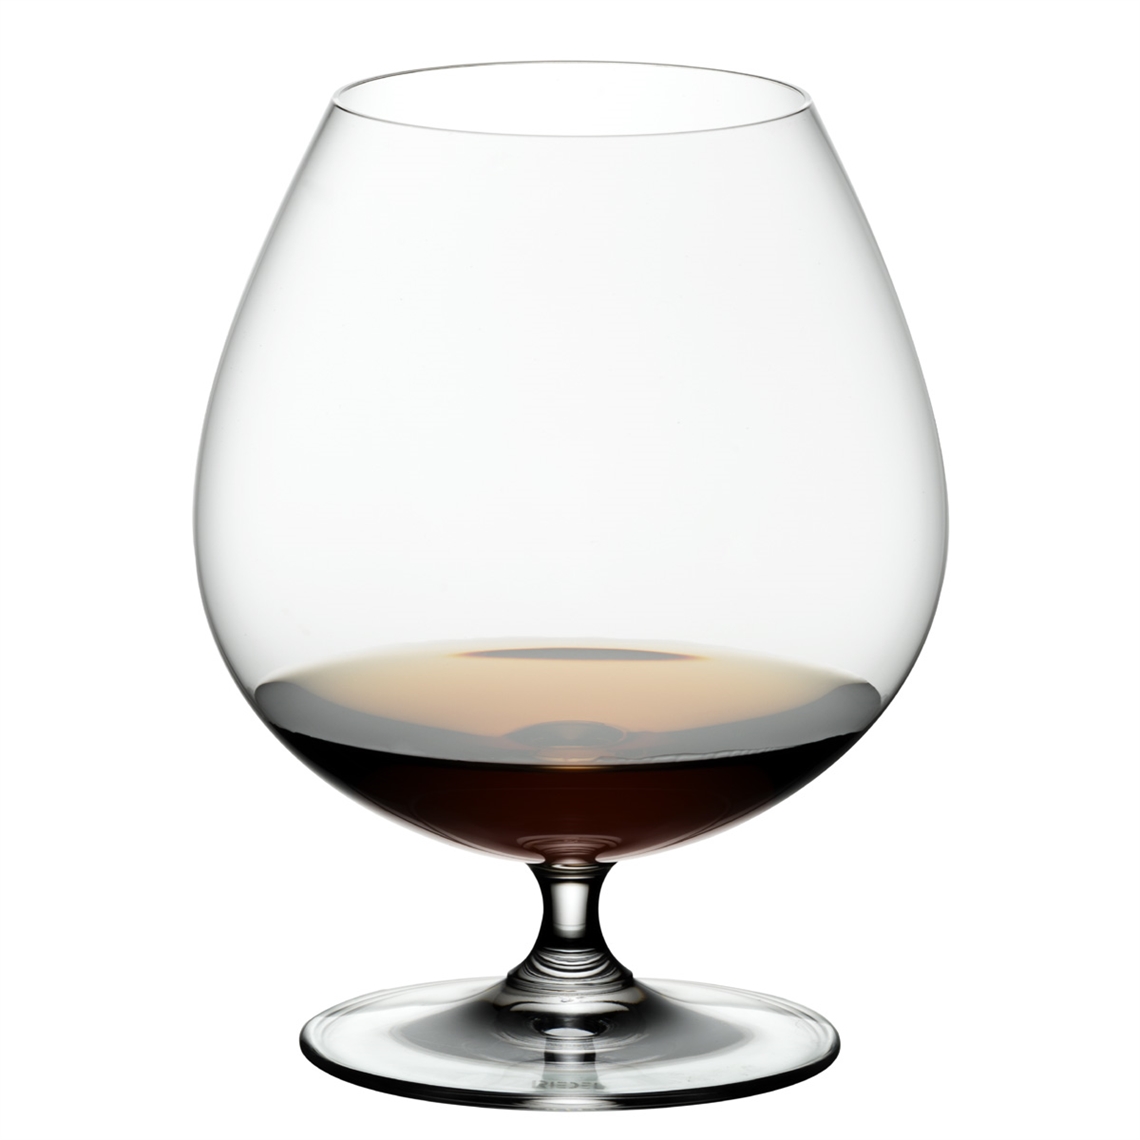 View more riedel from our Spirit Glasses range